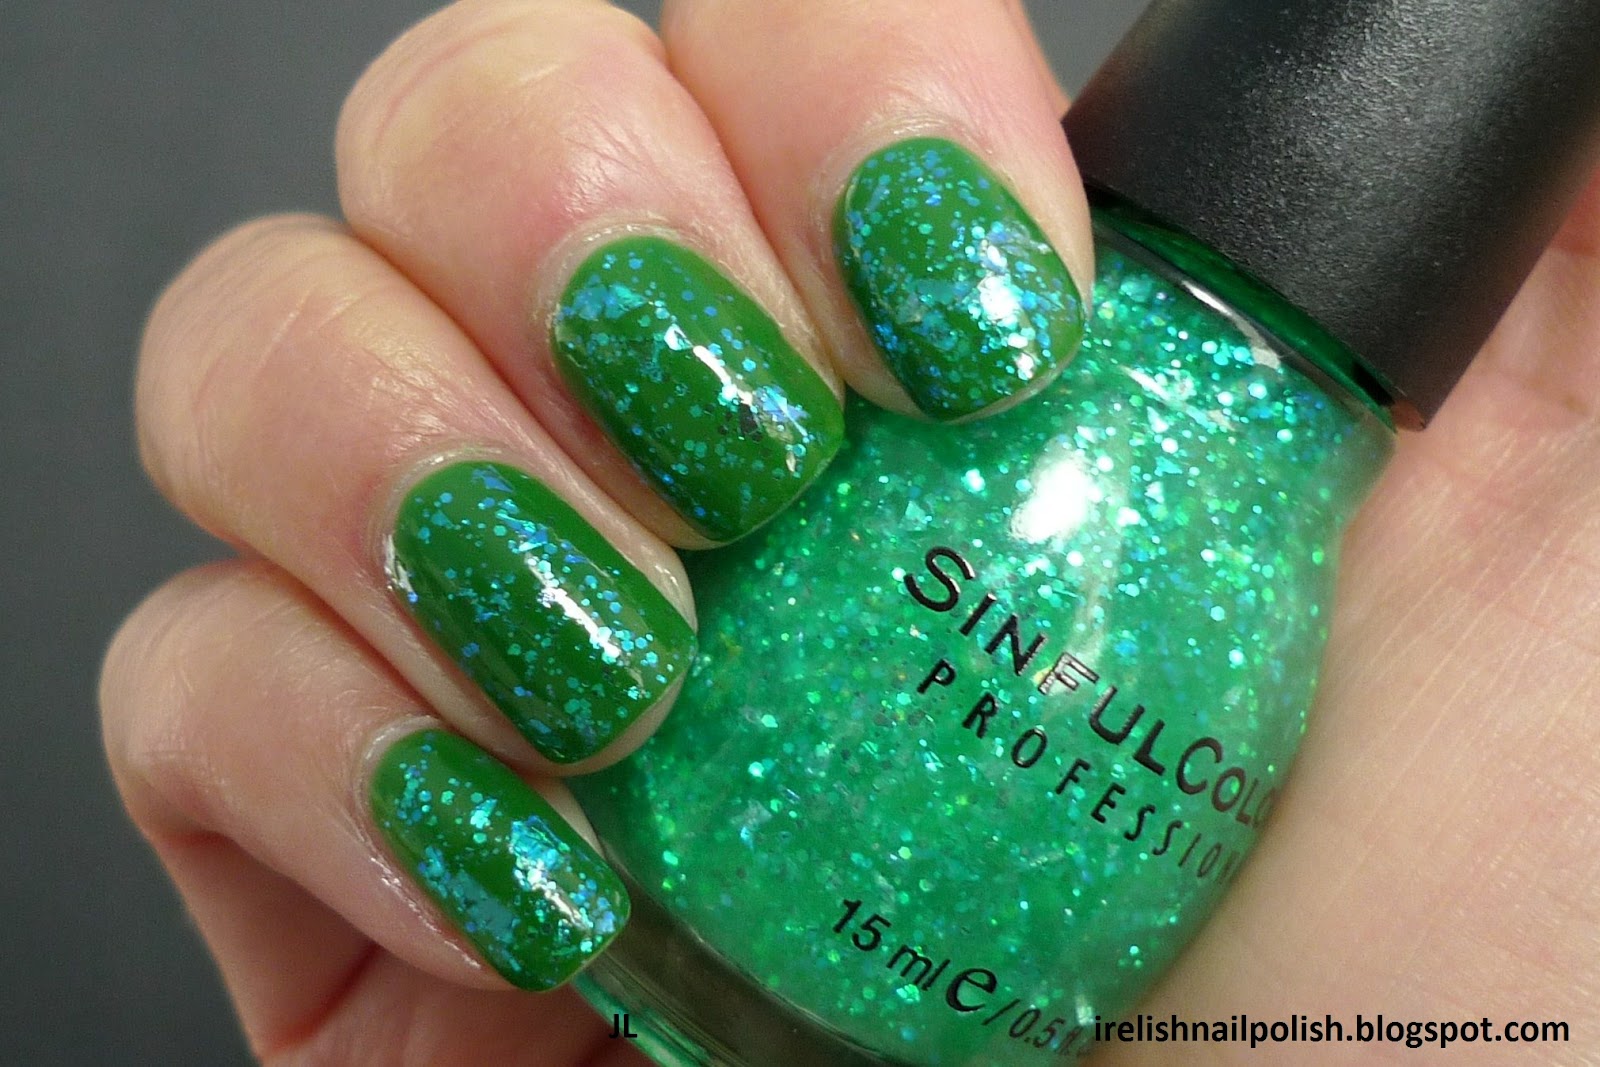 4. Sinful Colors Acid Test Nail Polish in "Lime Green" - wide 6